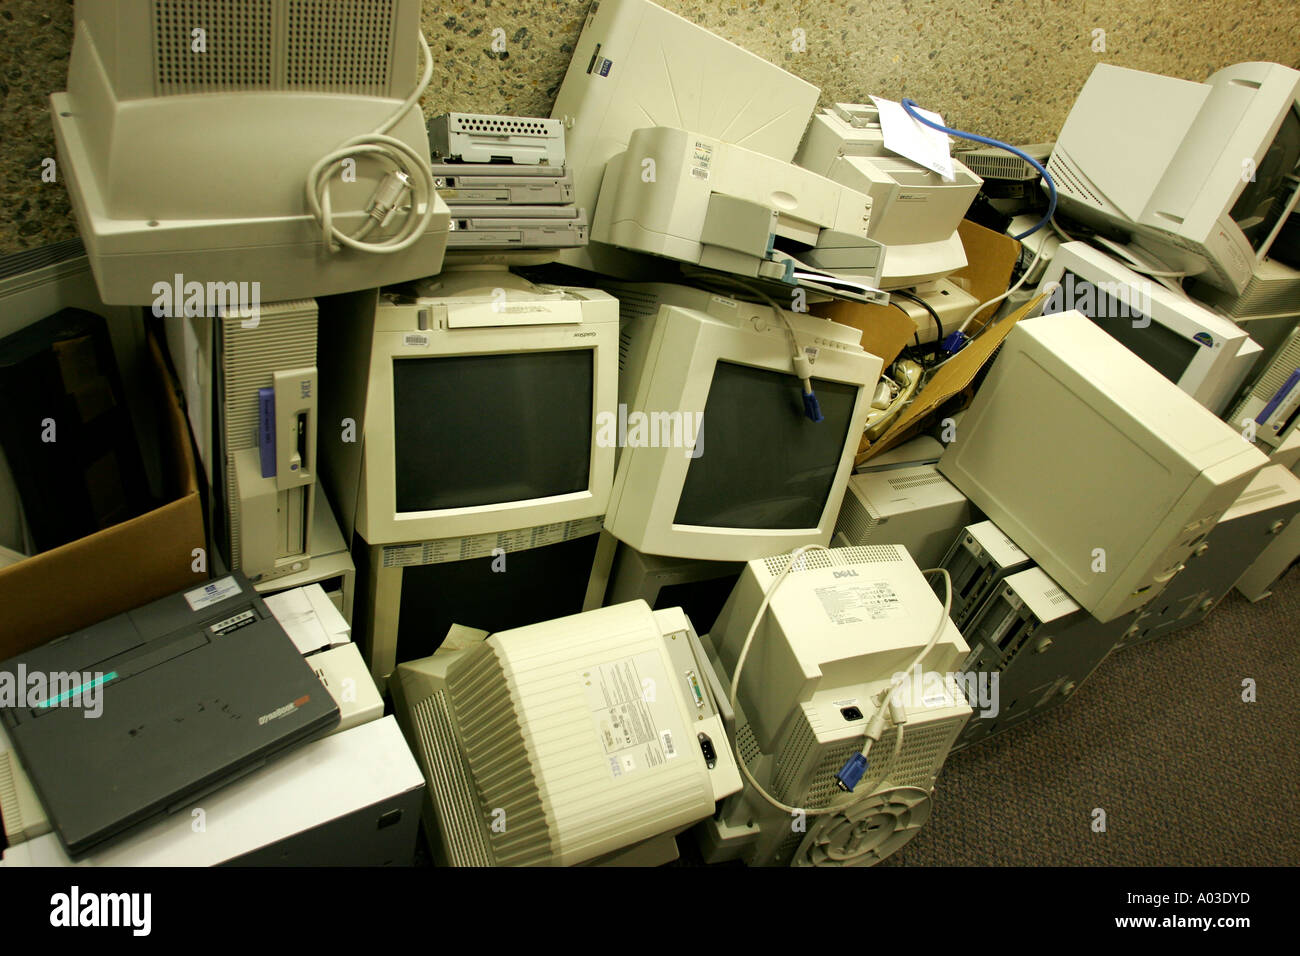 Redundant computer technology is stacked in a high rise office Stock Photo